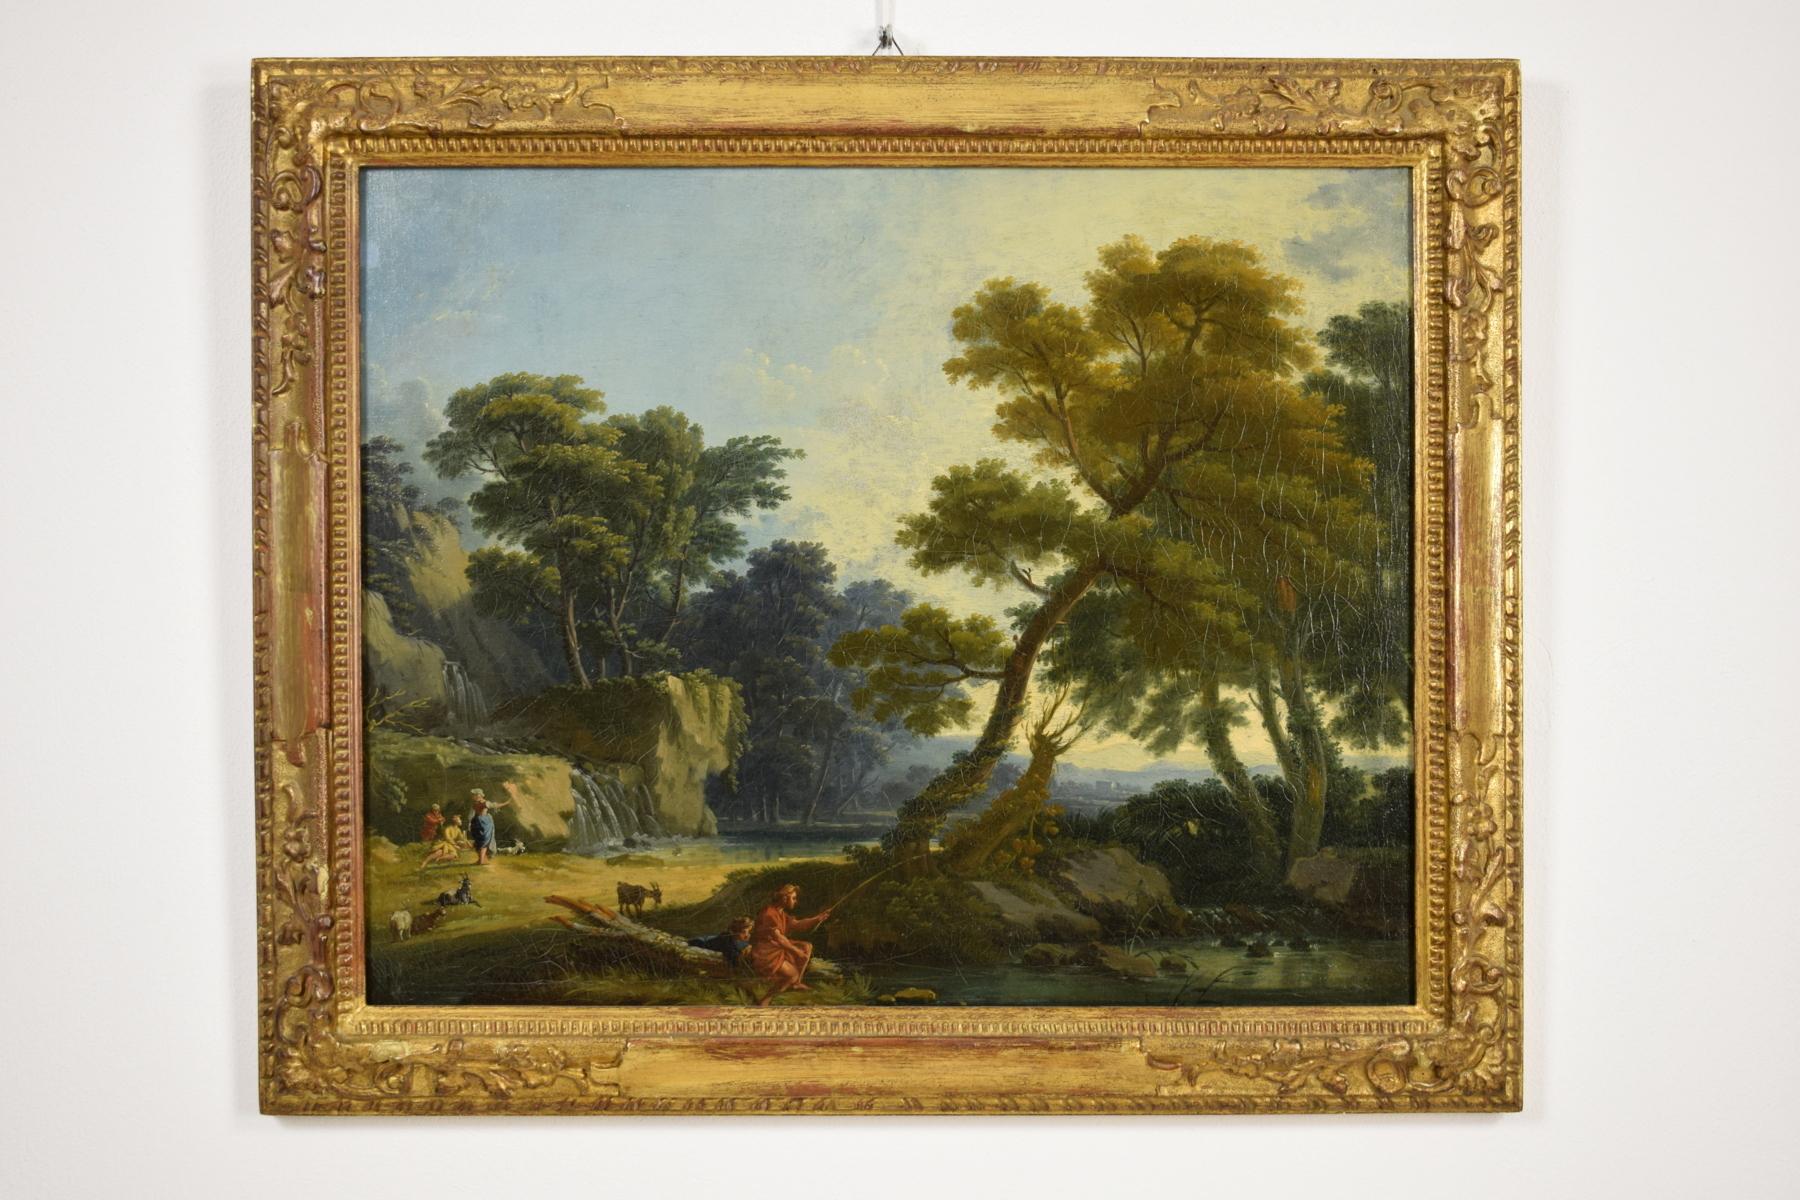 Giuseppe Zocchi 'Attributed' Oil on Canvas, Landscape with Figures 2